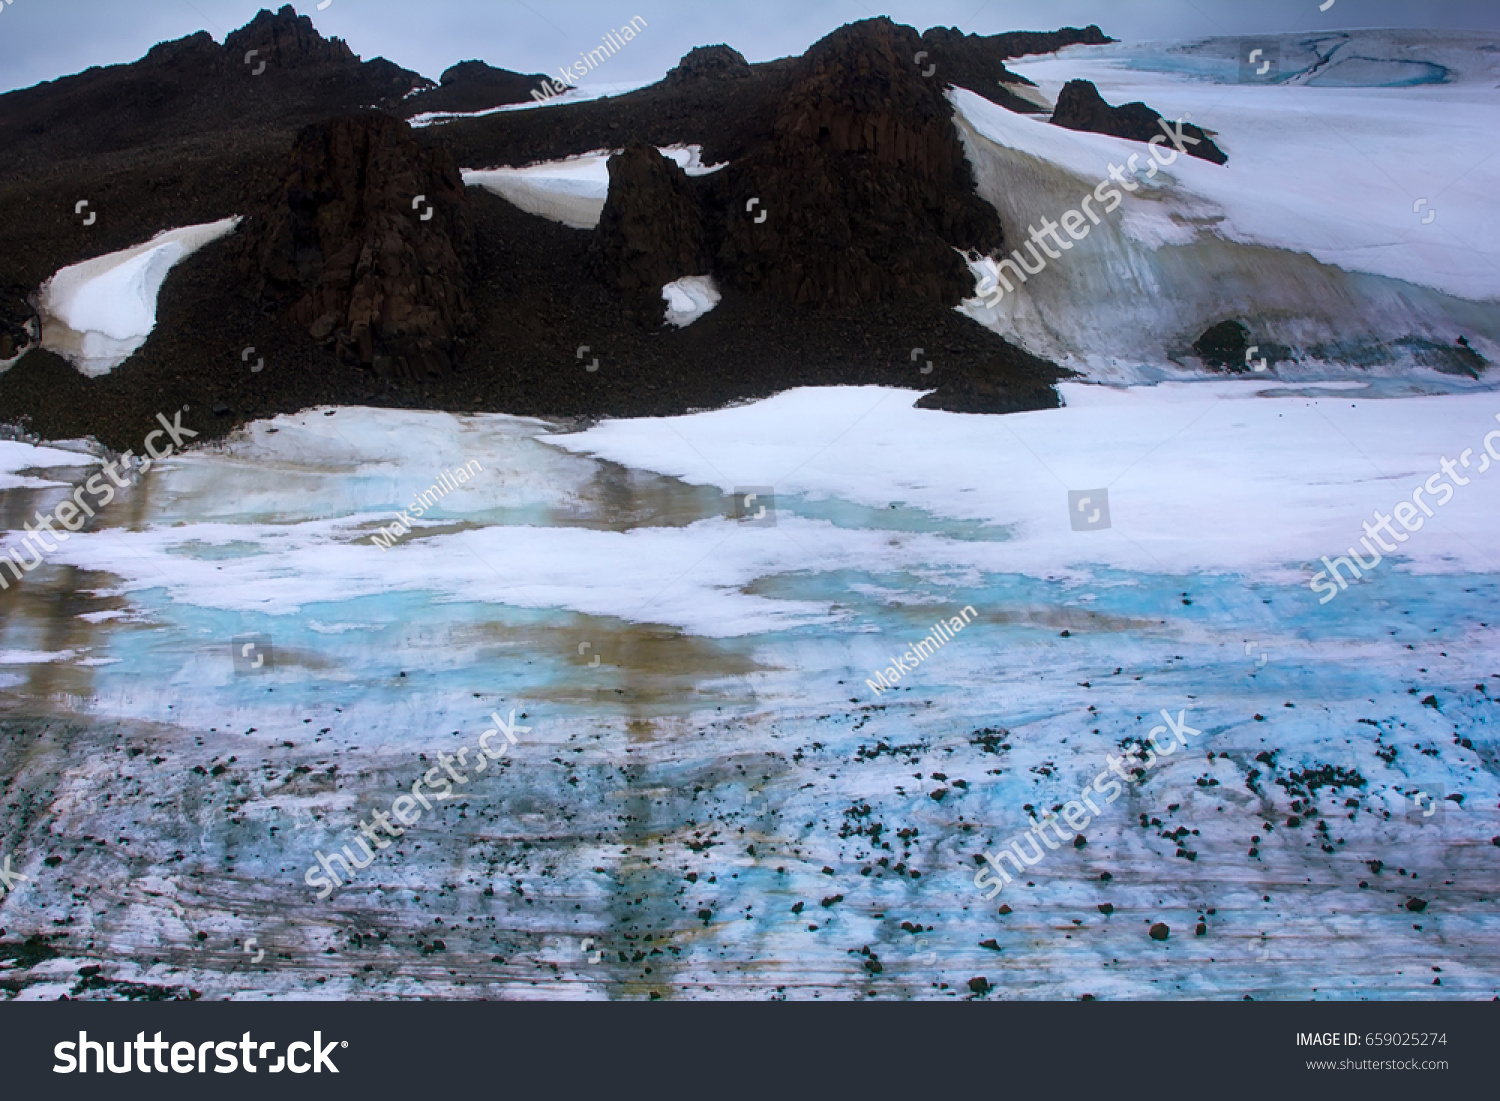 Melting of glaciers in high arctic zone. Currently, there are stones which are on glacier during the Ice age. Arctic, Franz Josef Land #659025274